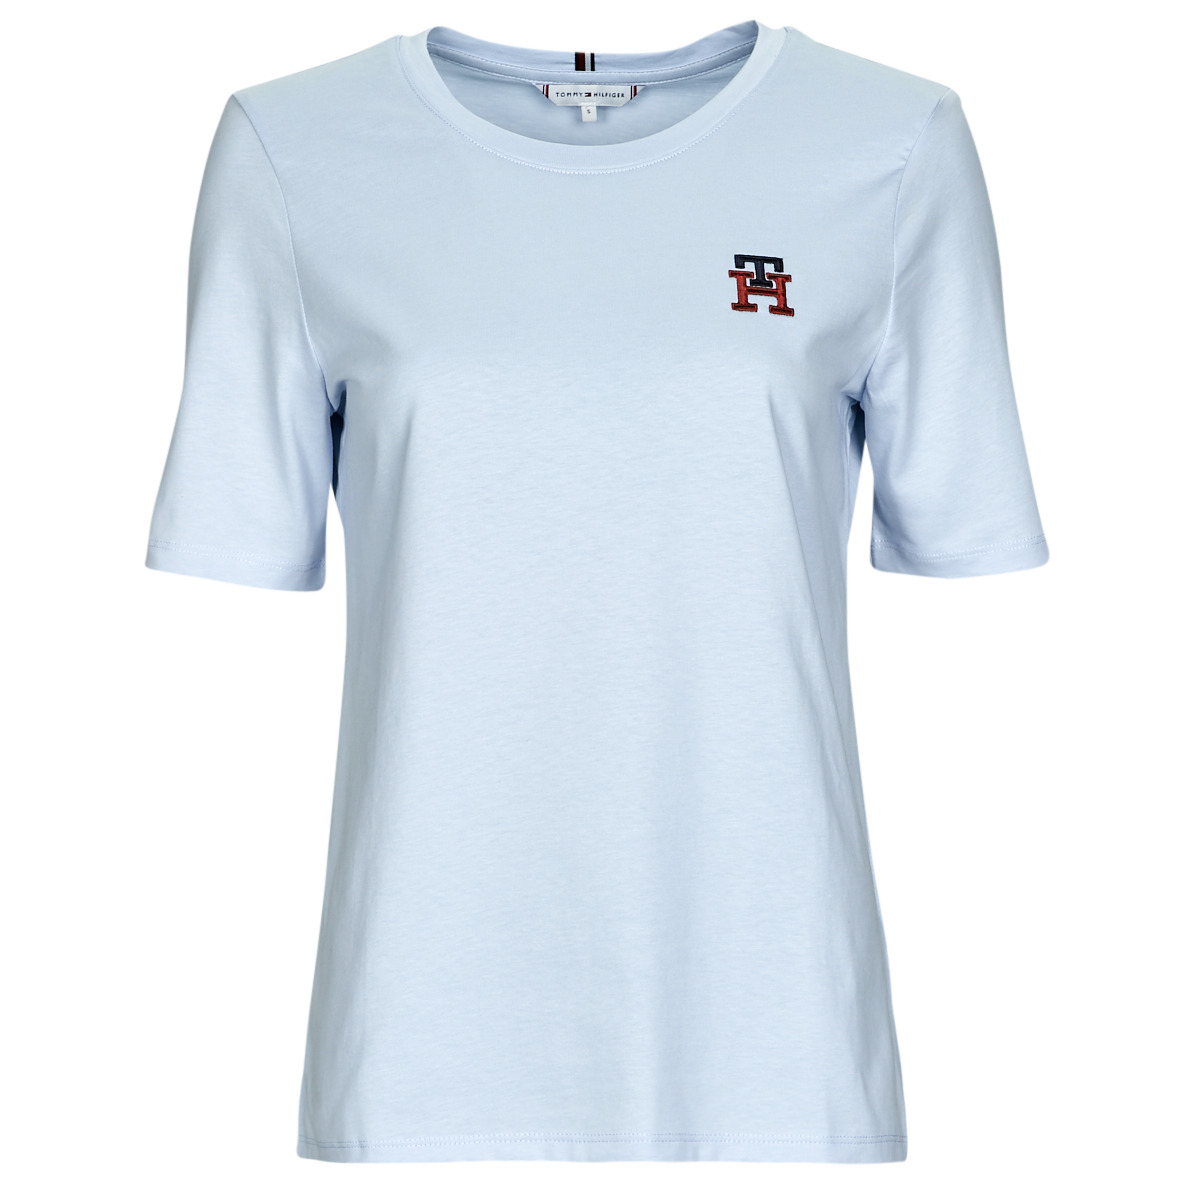 Tommy Hilfiger REG MONOGRAM SS Women EMB Clothing ! Sky - short-sleeved € | 44,00 delivery Europe / C-NK Blue - Fast t-shirts Spartoo